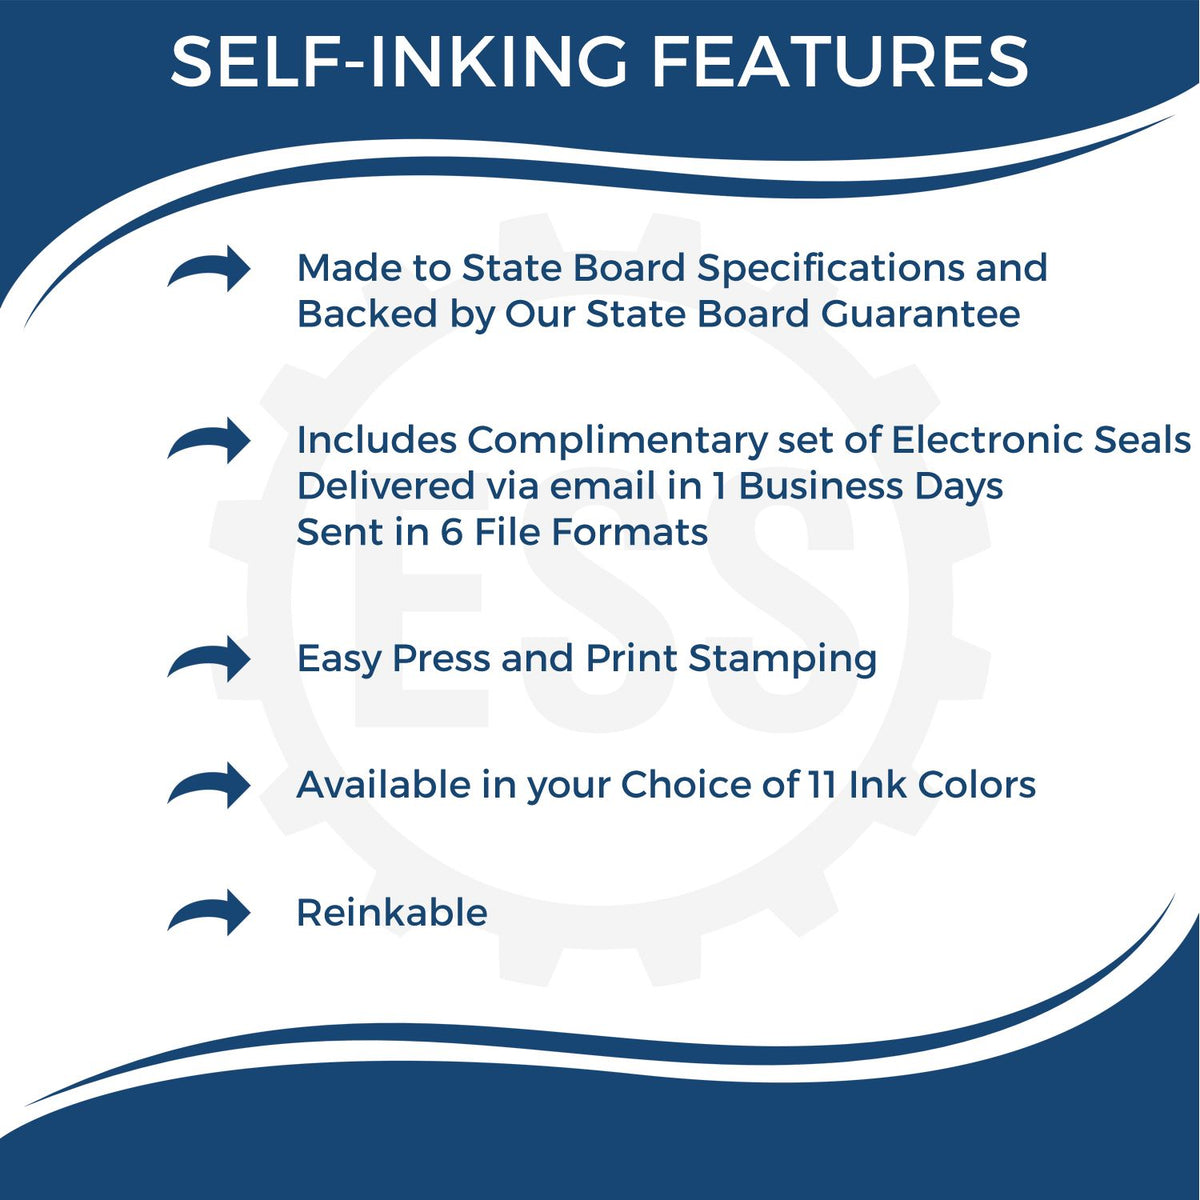 A picture of an infographic highlighting the selling points for the Self-Inking Montana Geologist Stamp